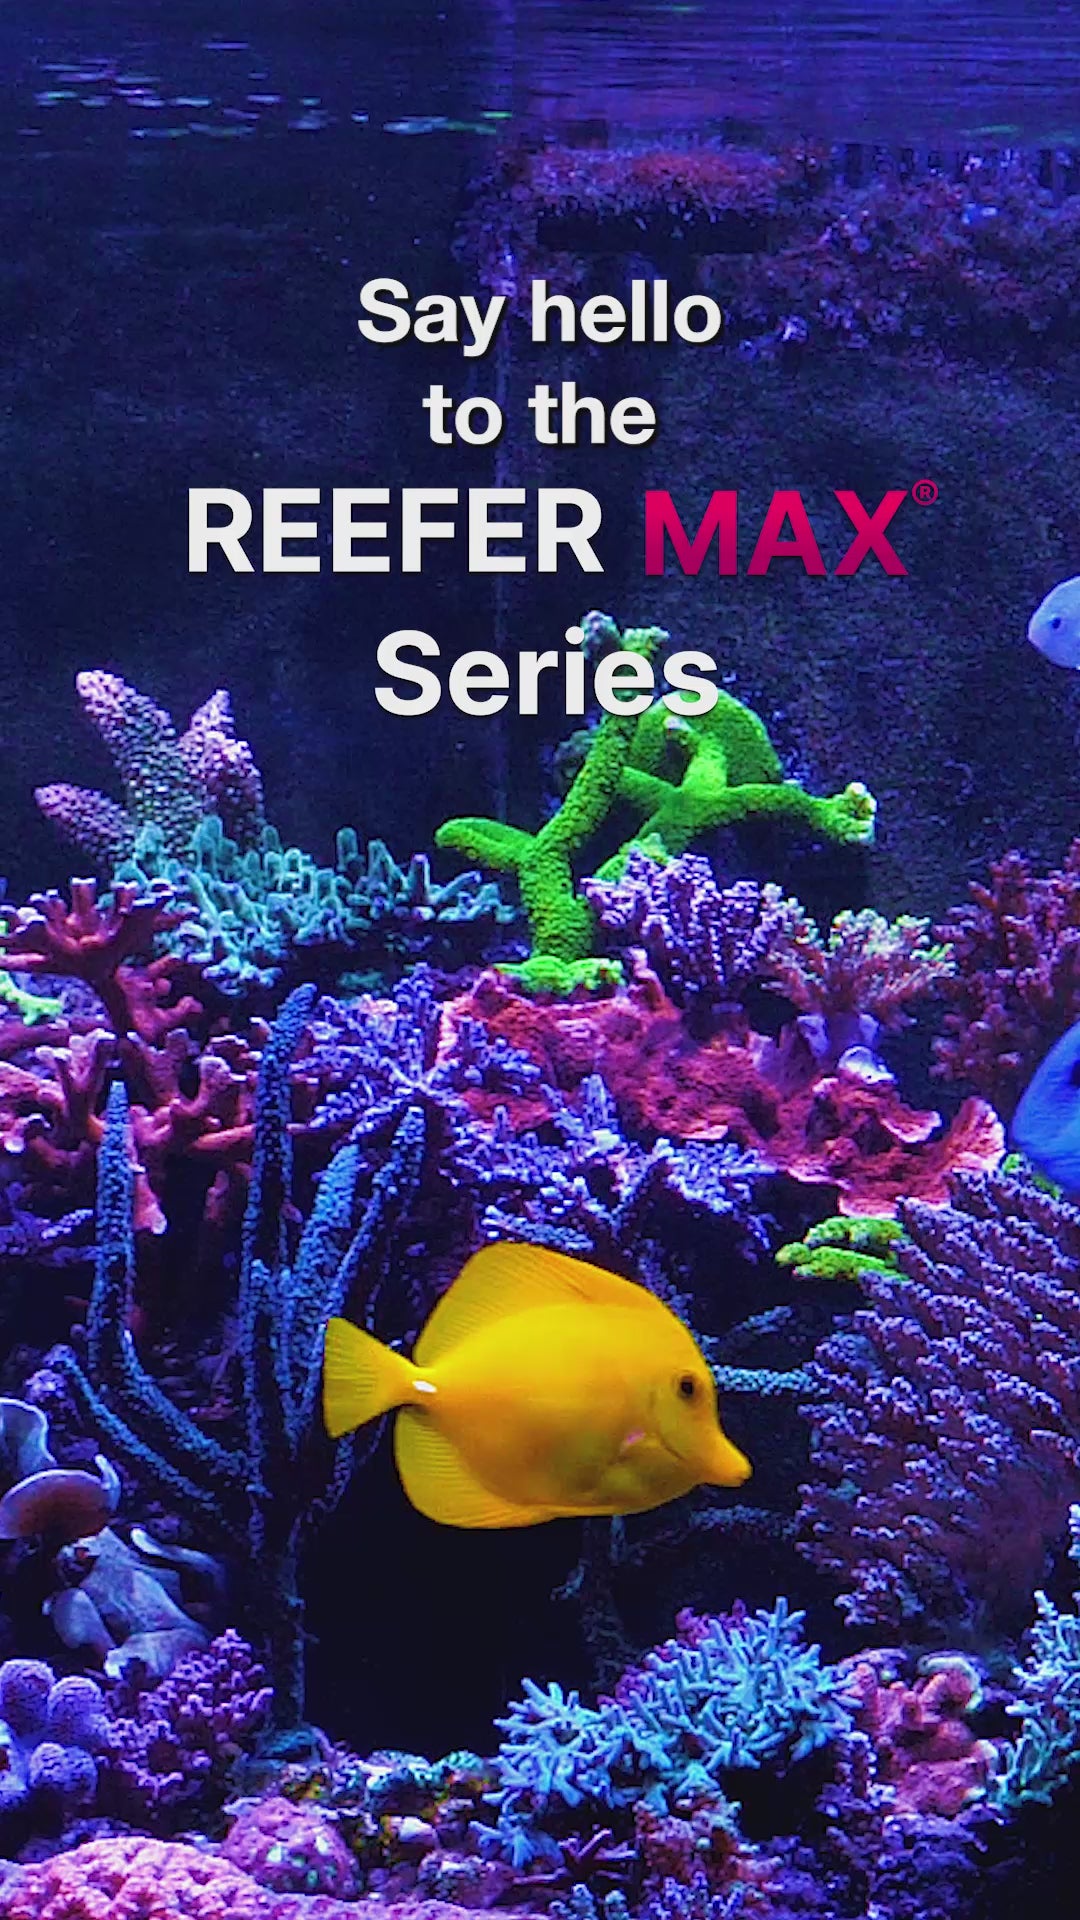 Load video: reefer max series - red sea video